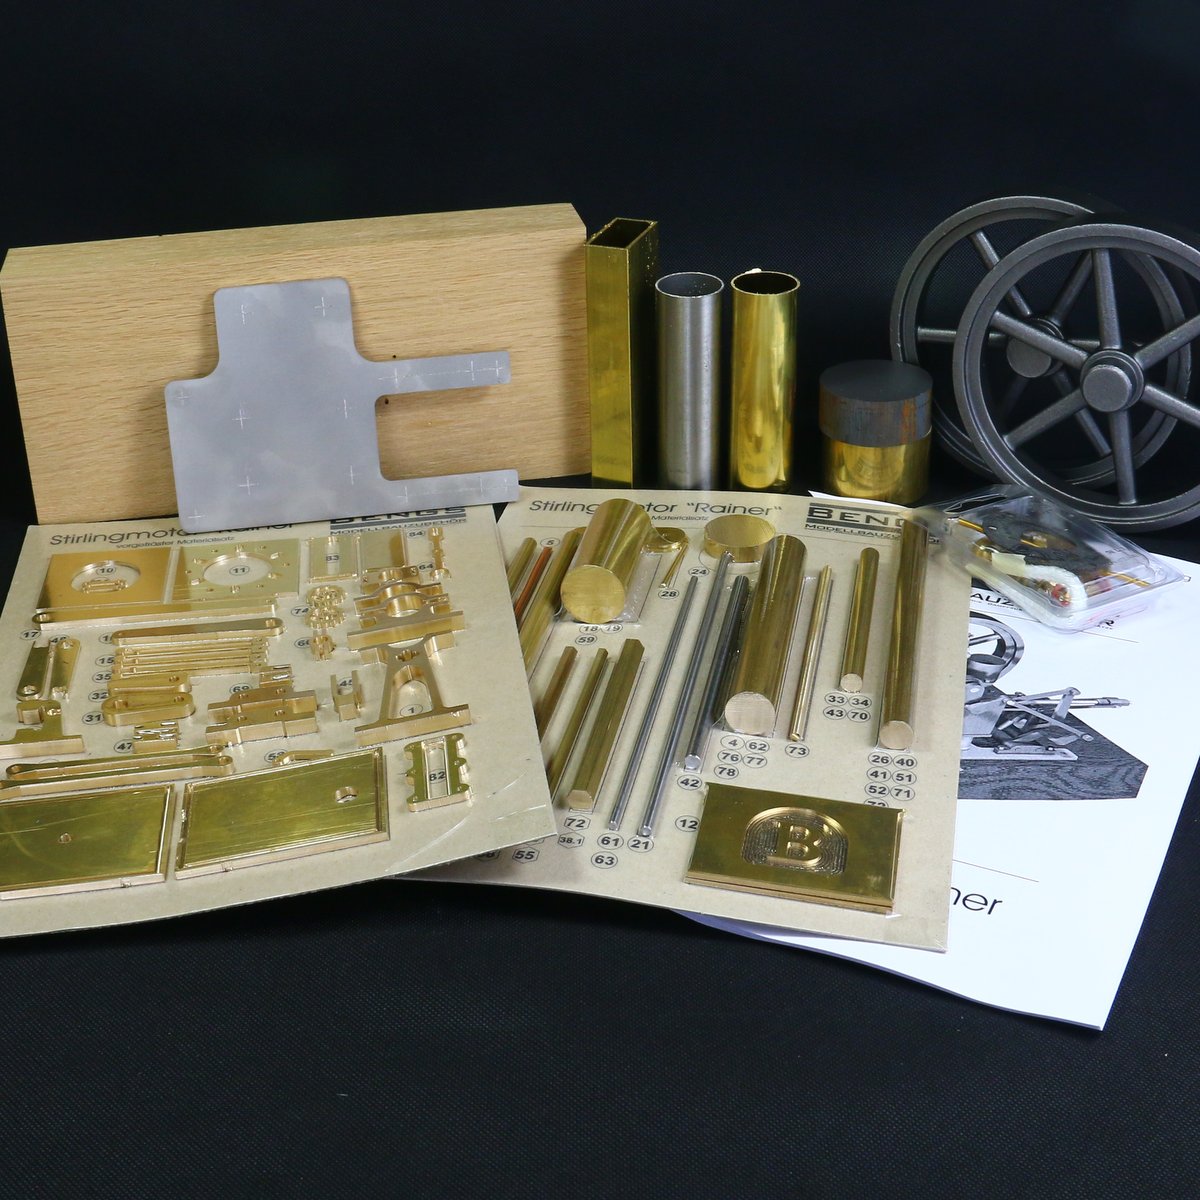 Stirling engine Rainer with centrifugal governor material kit